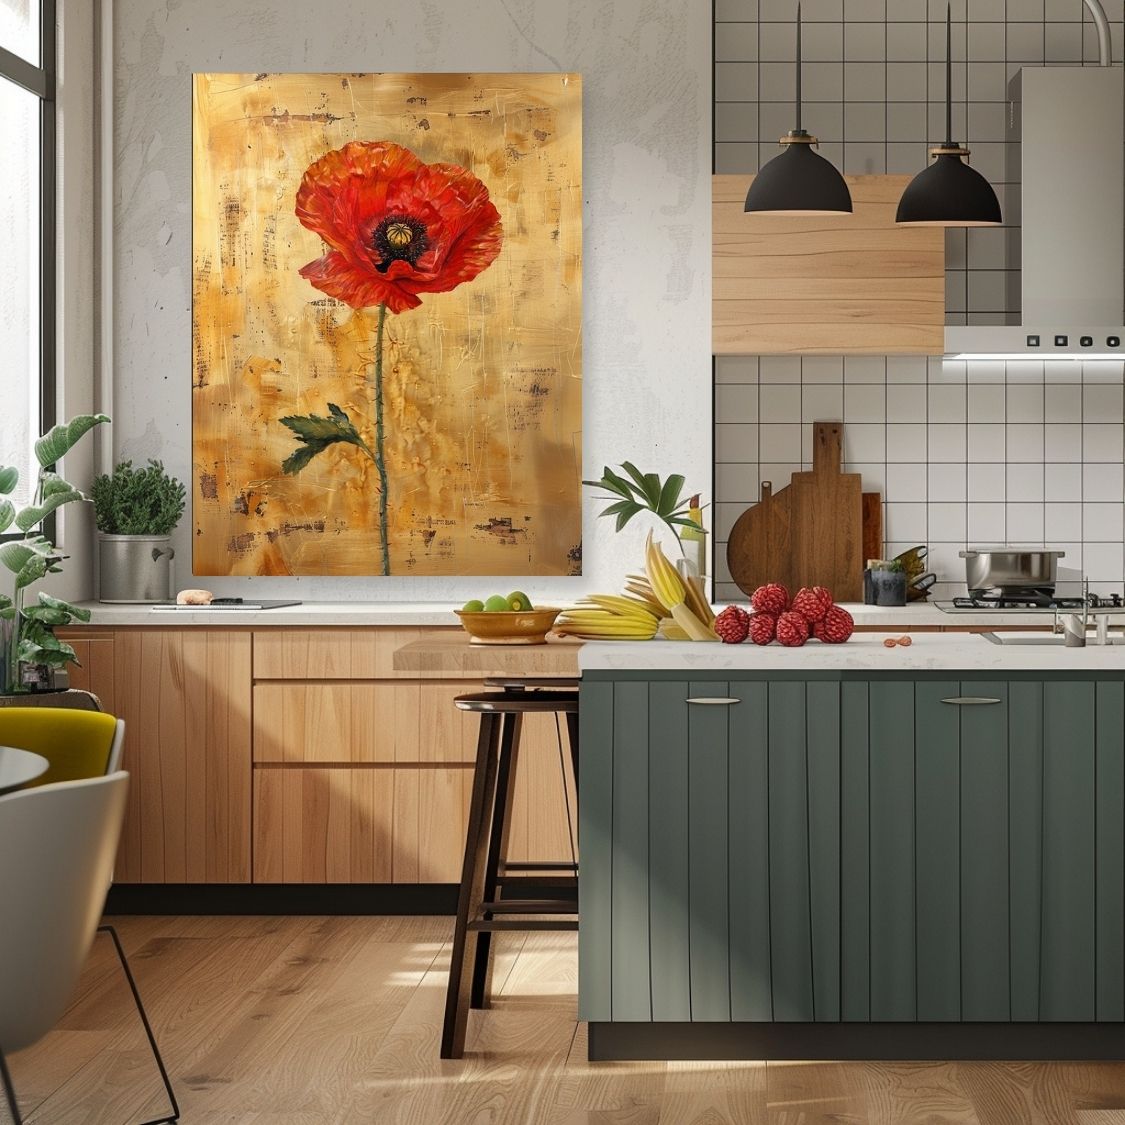 Canvas print wall art showing 'Poppy Poise - Elegance in Simplicity' in a kitchen